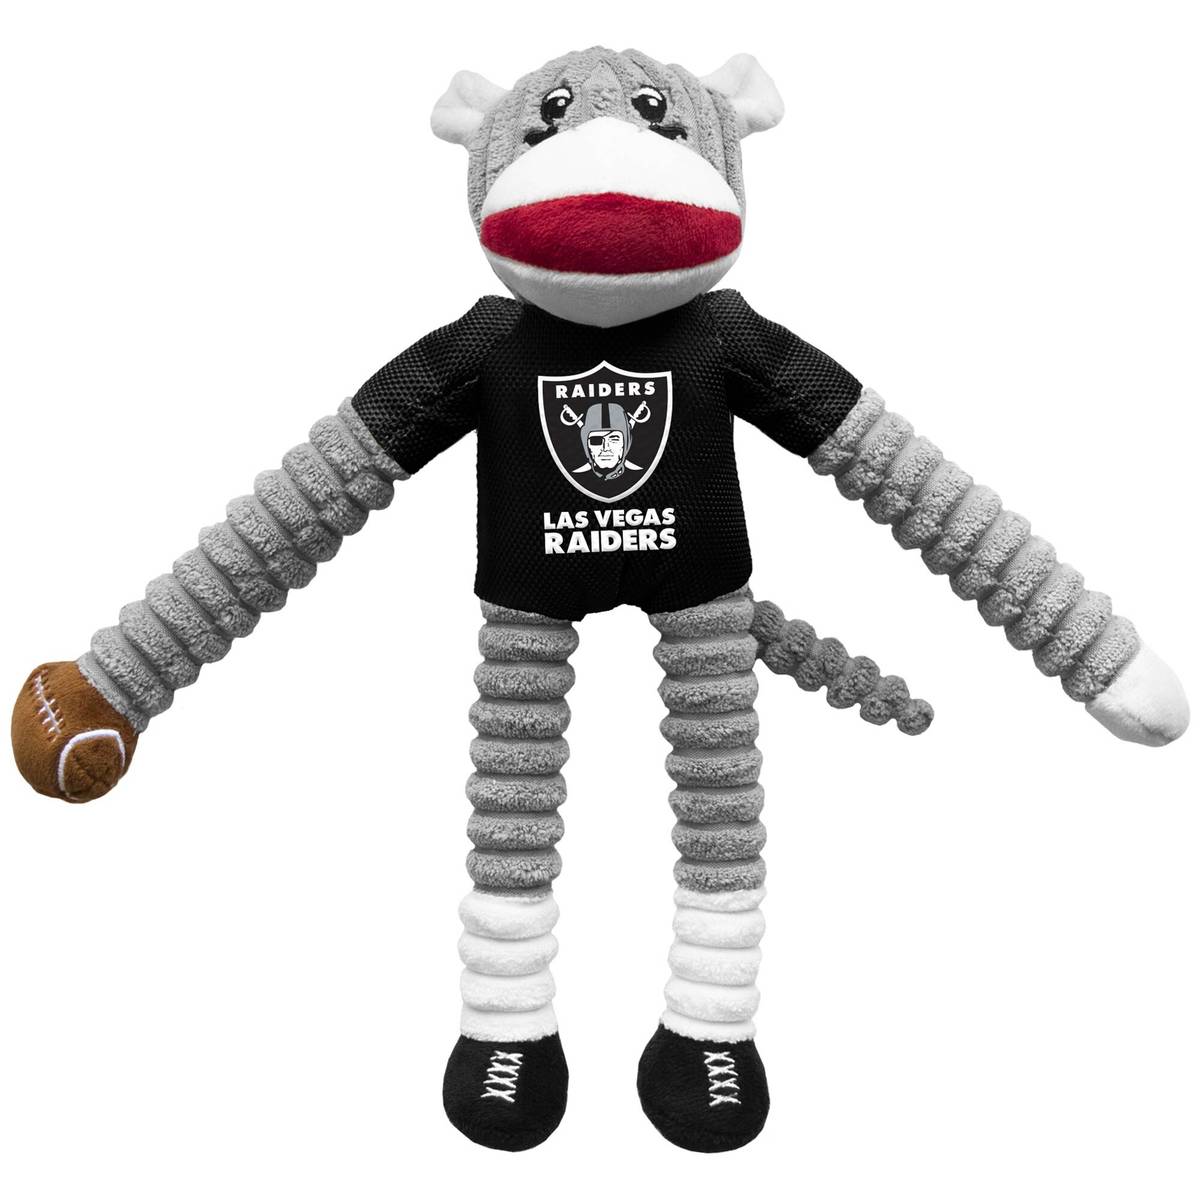 The Little Earth Las Vegas Raiders Sock Monkey pet toy is plush and cuddly — perfect for sink ...